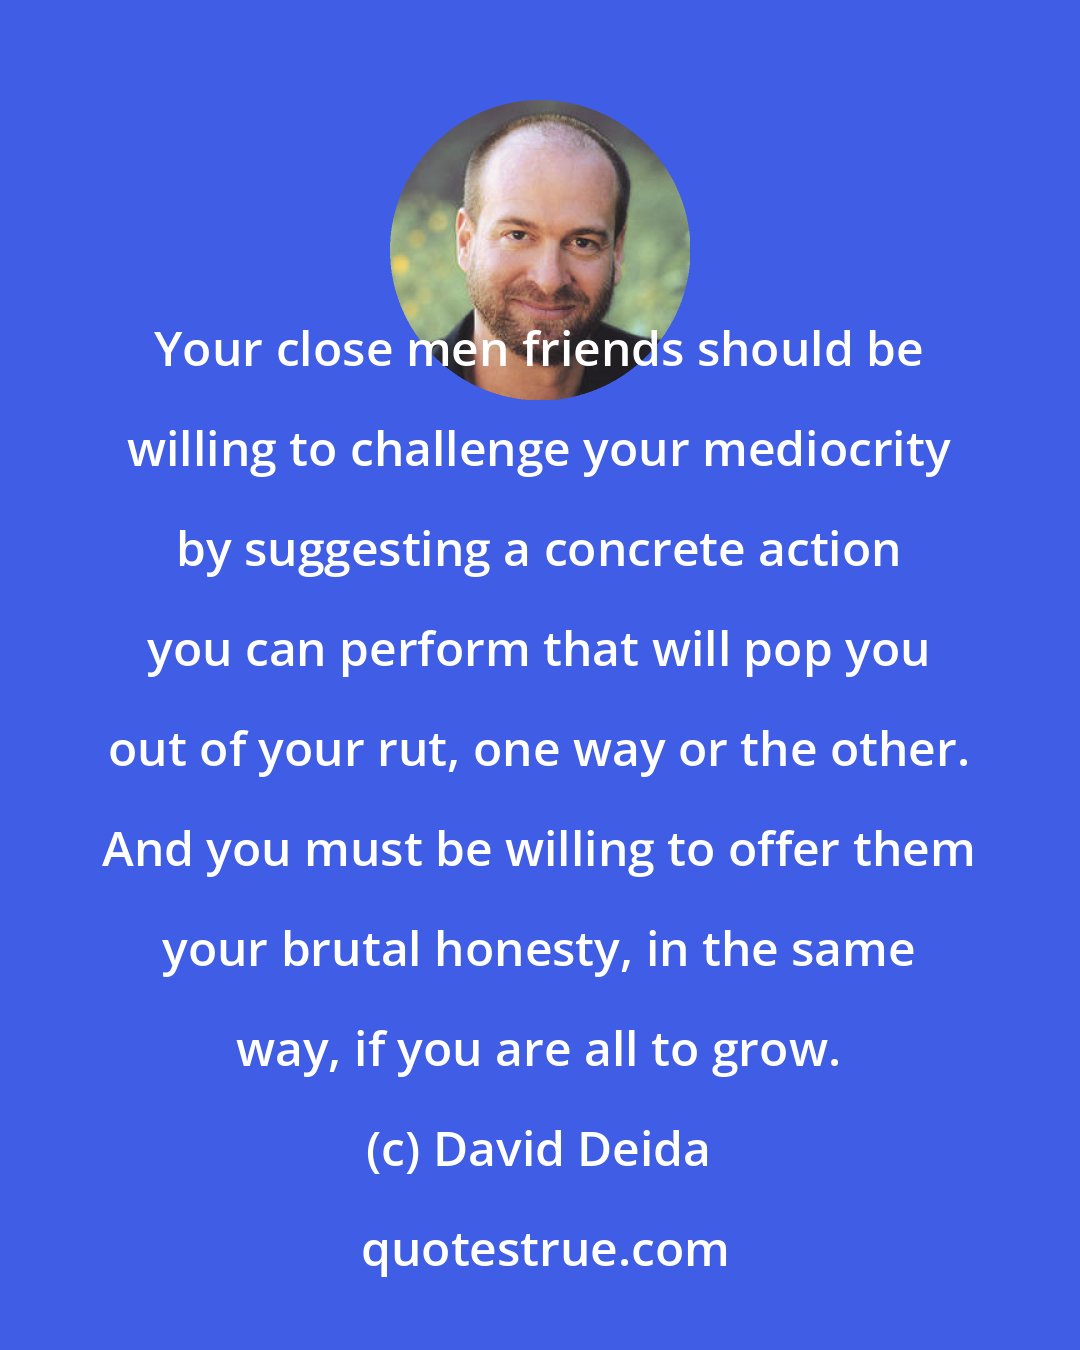 David Deida: Your close men friends should be willing to challenge your mediocrity by suggesting a concrete action you can perform that will pop you out of your rut, one way or the other. And you must be willing to offer them your brutal honesty, in the same way, if you are all to grow.